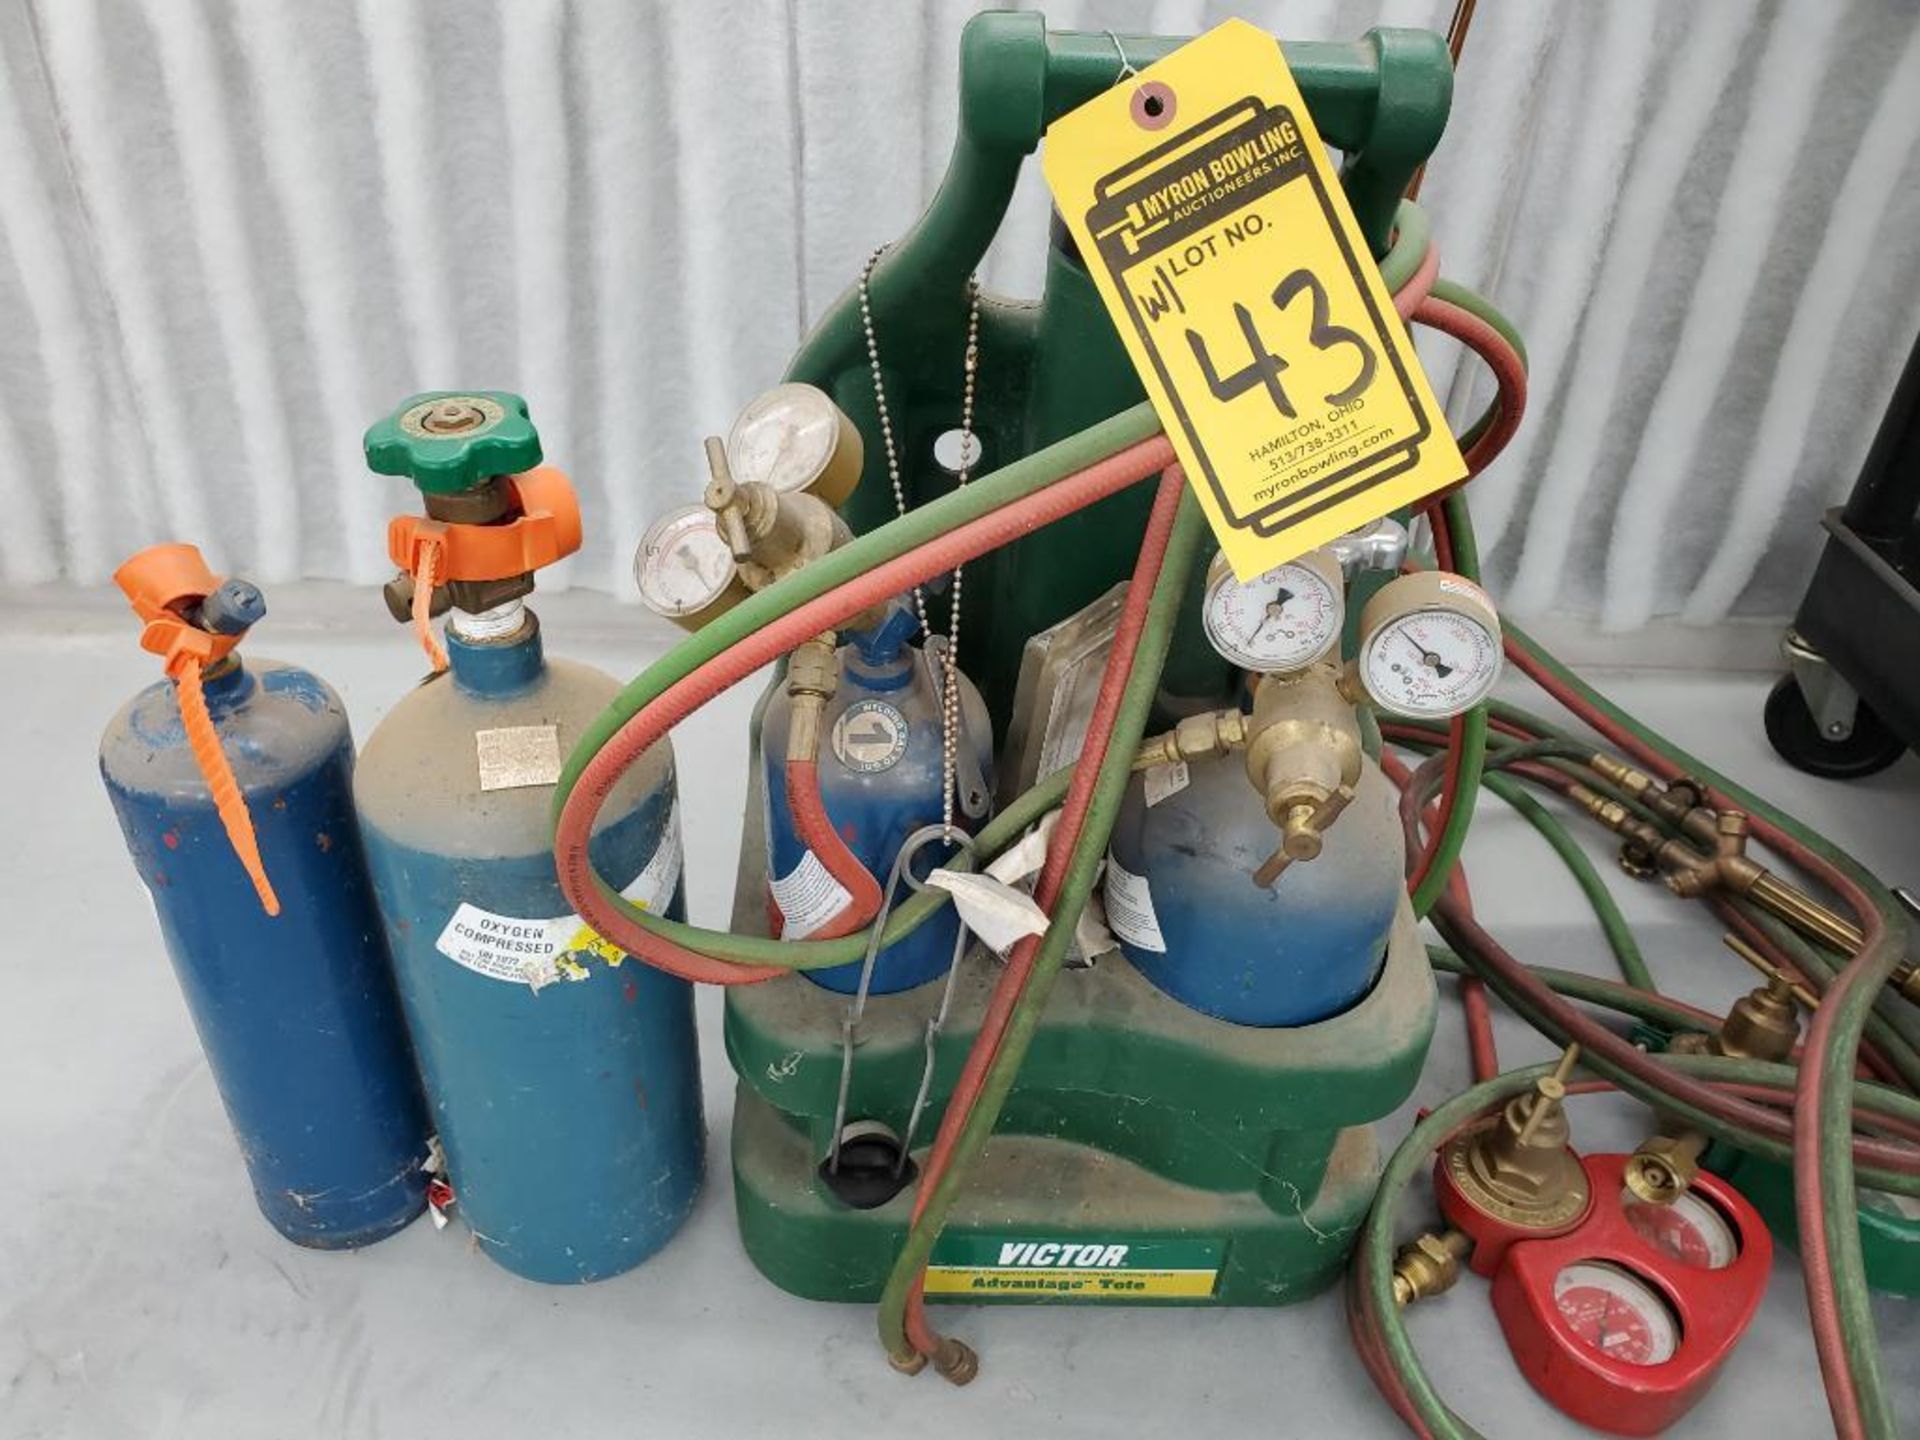 Victor Portable Oxy/Acetylene Welding/Cutting Outfit, Torch Head w/ Hose & Gauges, Cart w/ Wire Gun - Image 2 of 7